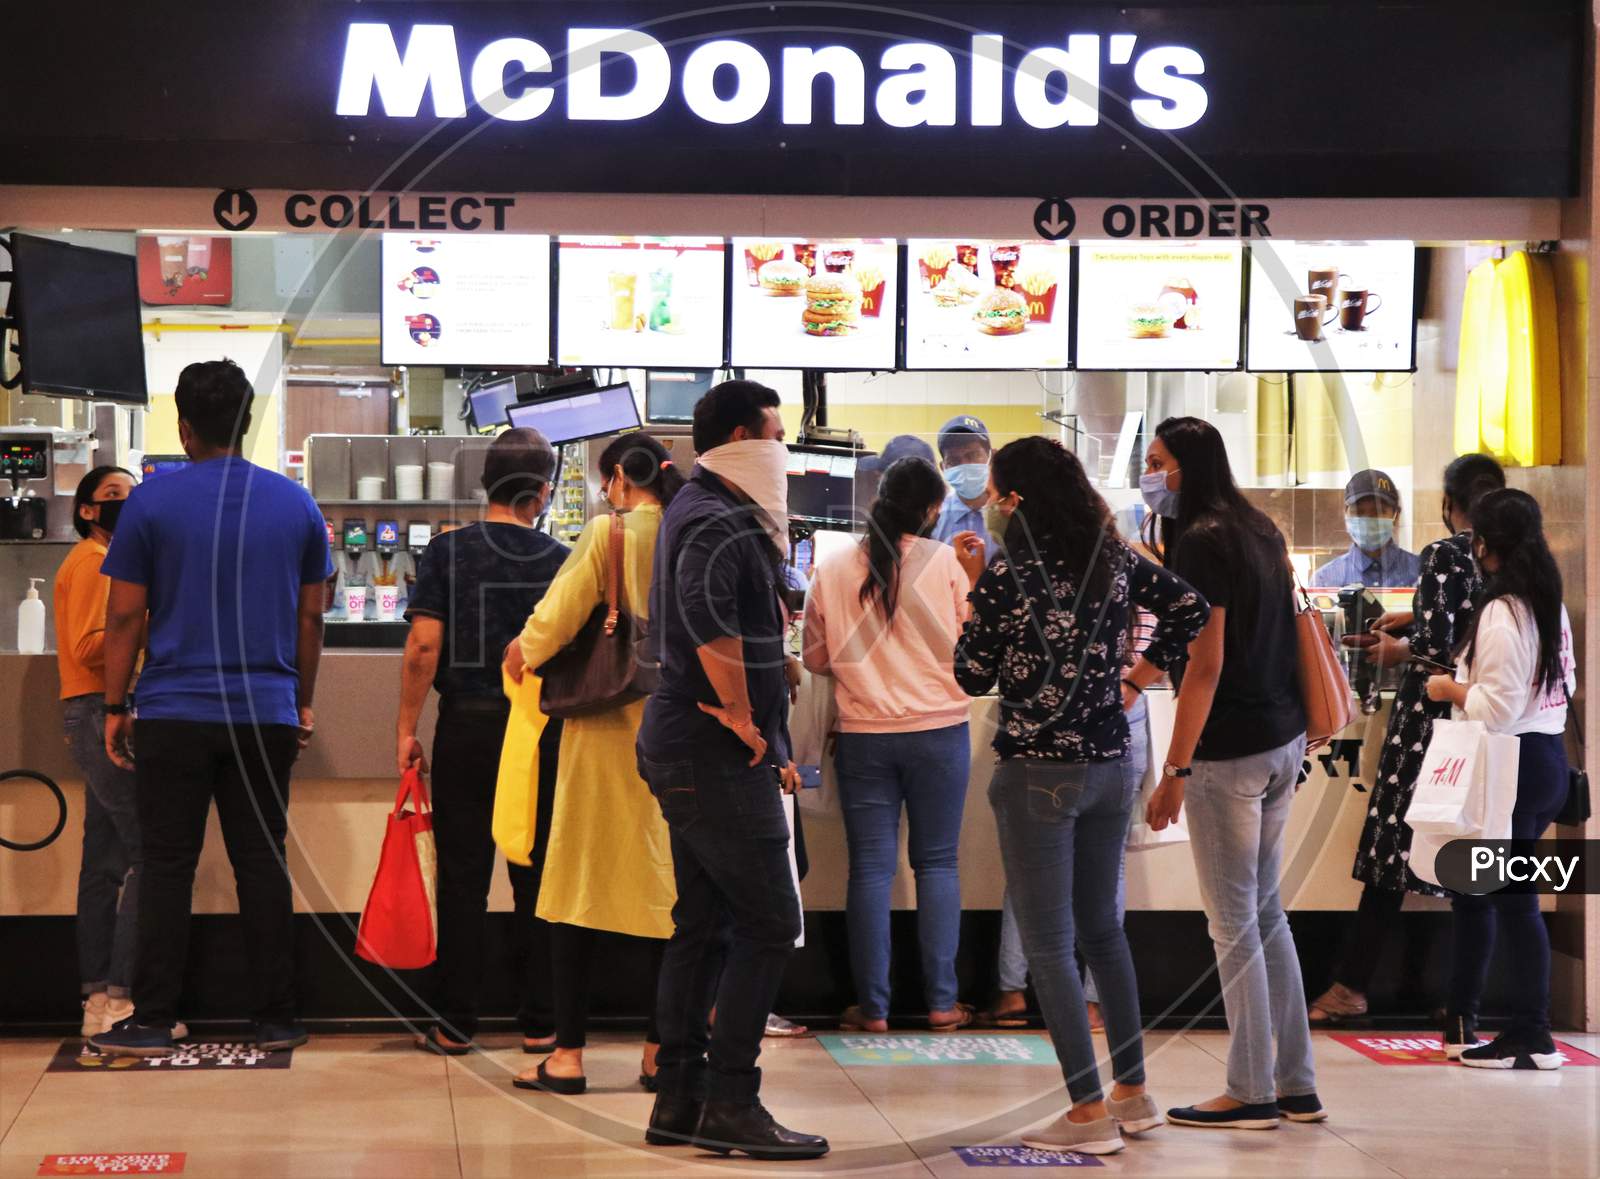 People are seen at a food court at a mall after they reopened amidst the spread of the coronavirus disease (COVID-19) in Mumbai, India on October 13, 2020.